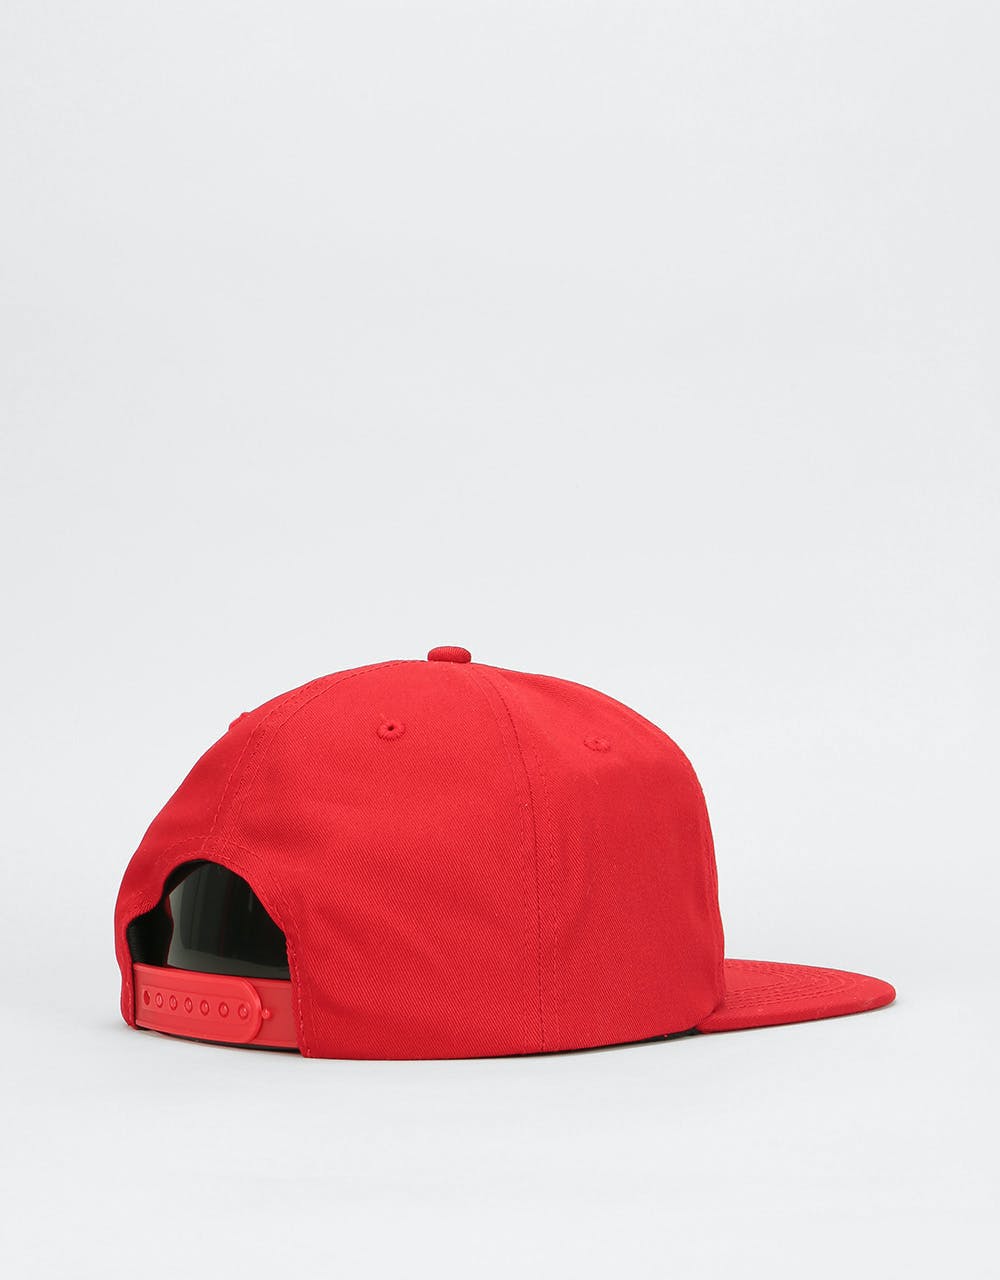 Thrasher Outlined Snapback Cap - Red